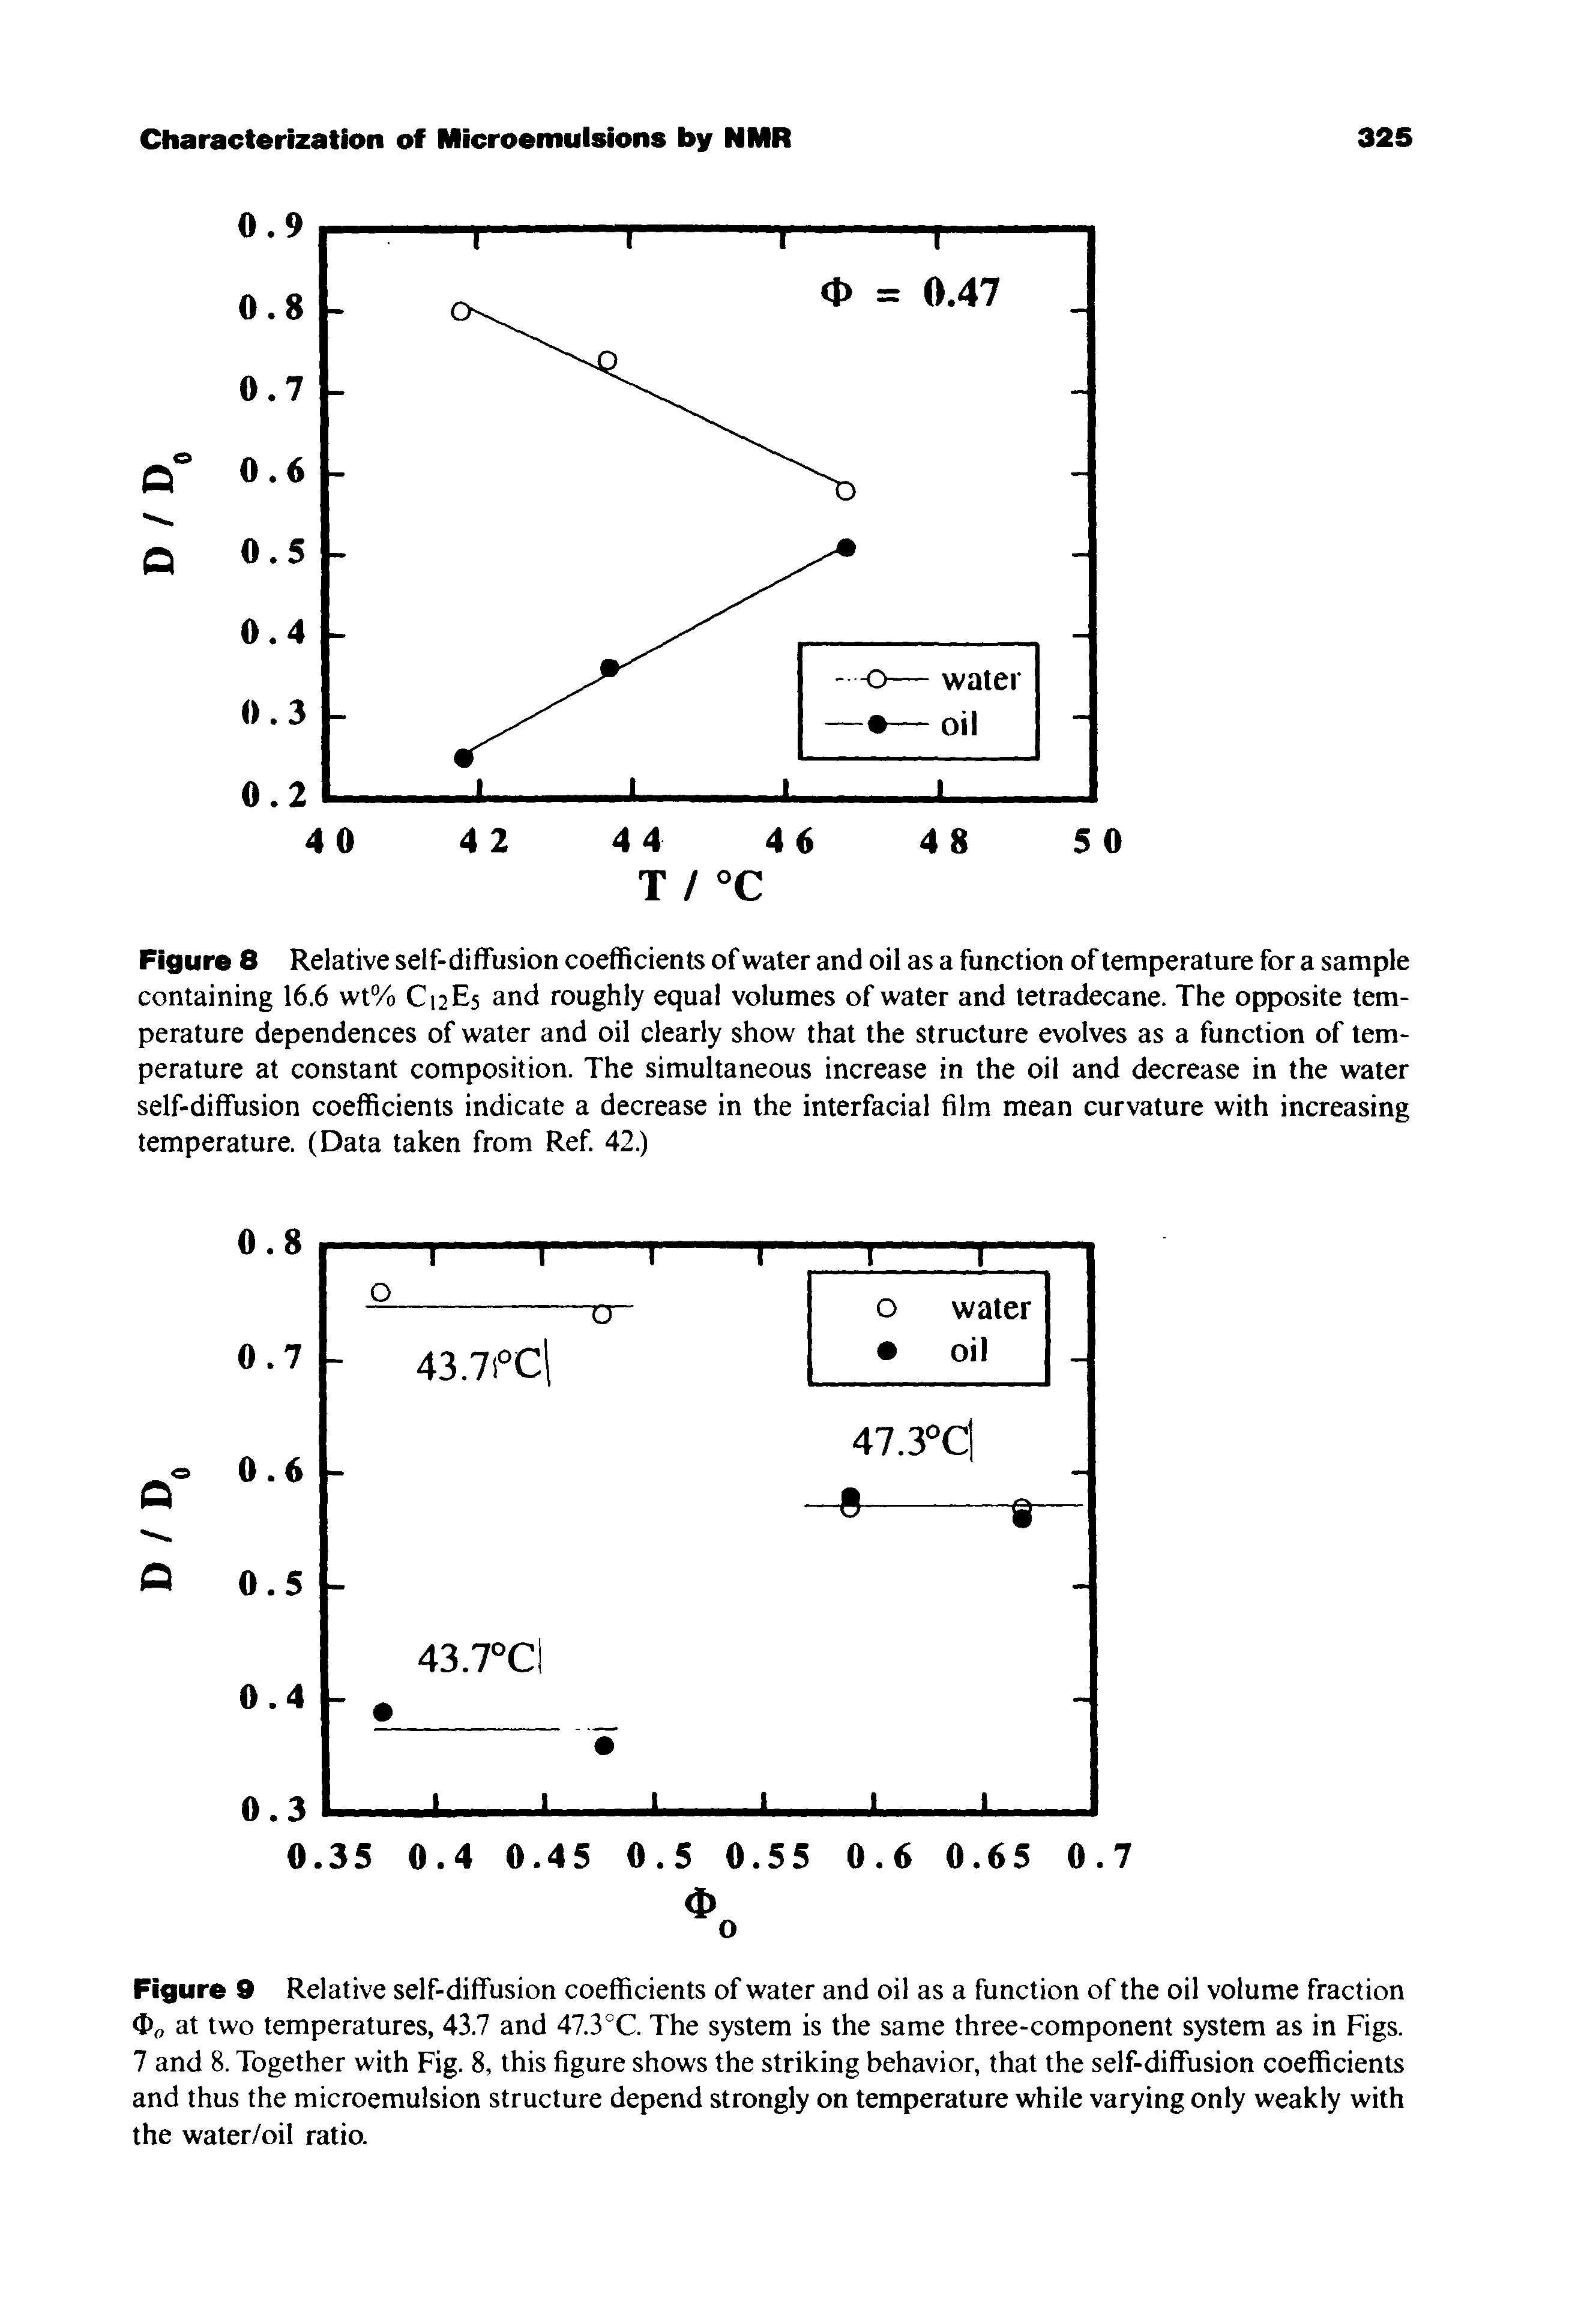 Figure 8 Relative self-diffusion coefficients of water and oil as a function of temperature for a sample containing 16.6 wt% C12E5 and roughly equal volumes of water and tetradecane. The opposite temperature dependences of water and oil clearly show that the structure evolves as a function of temperature at constant composition. The simultaneous increase in the oil and decrease in the water self-diffusion coefficients indicate a decrease in the interfacial film mean curvature with increasing temperature. (Data taken from Ref. 42.)...